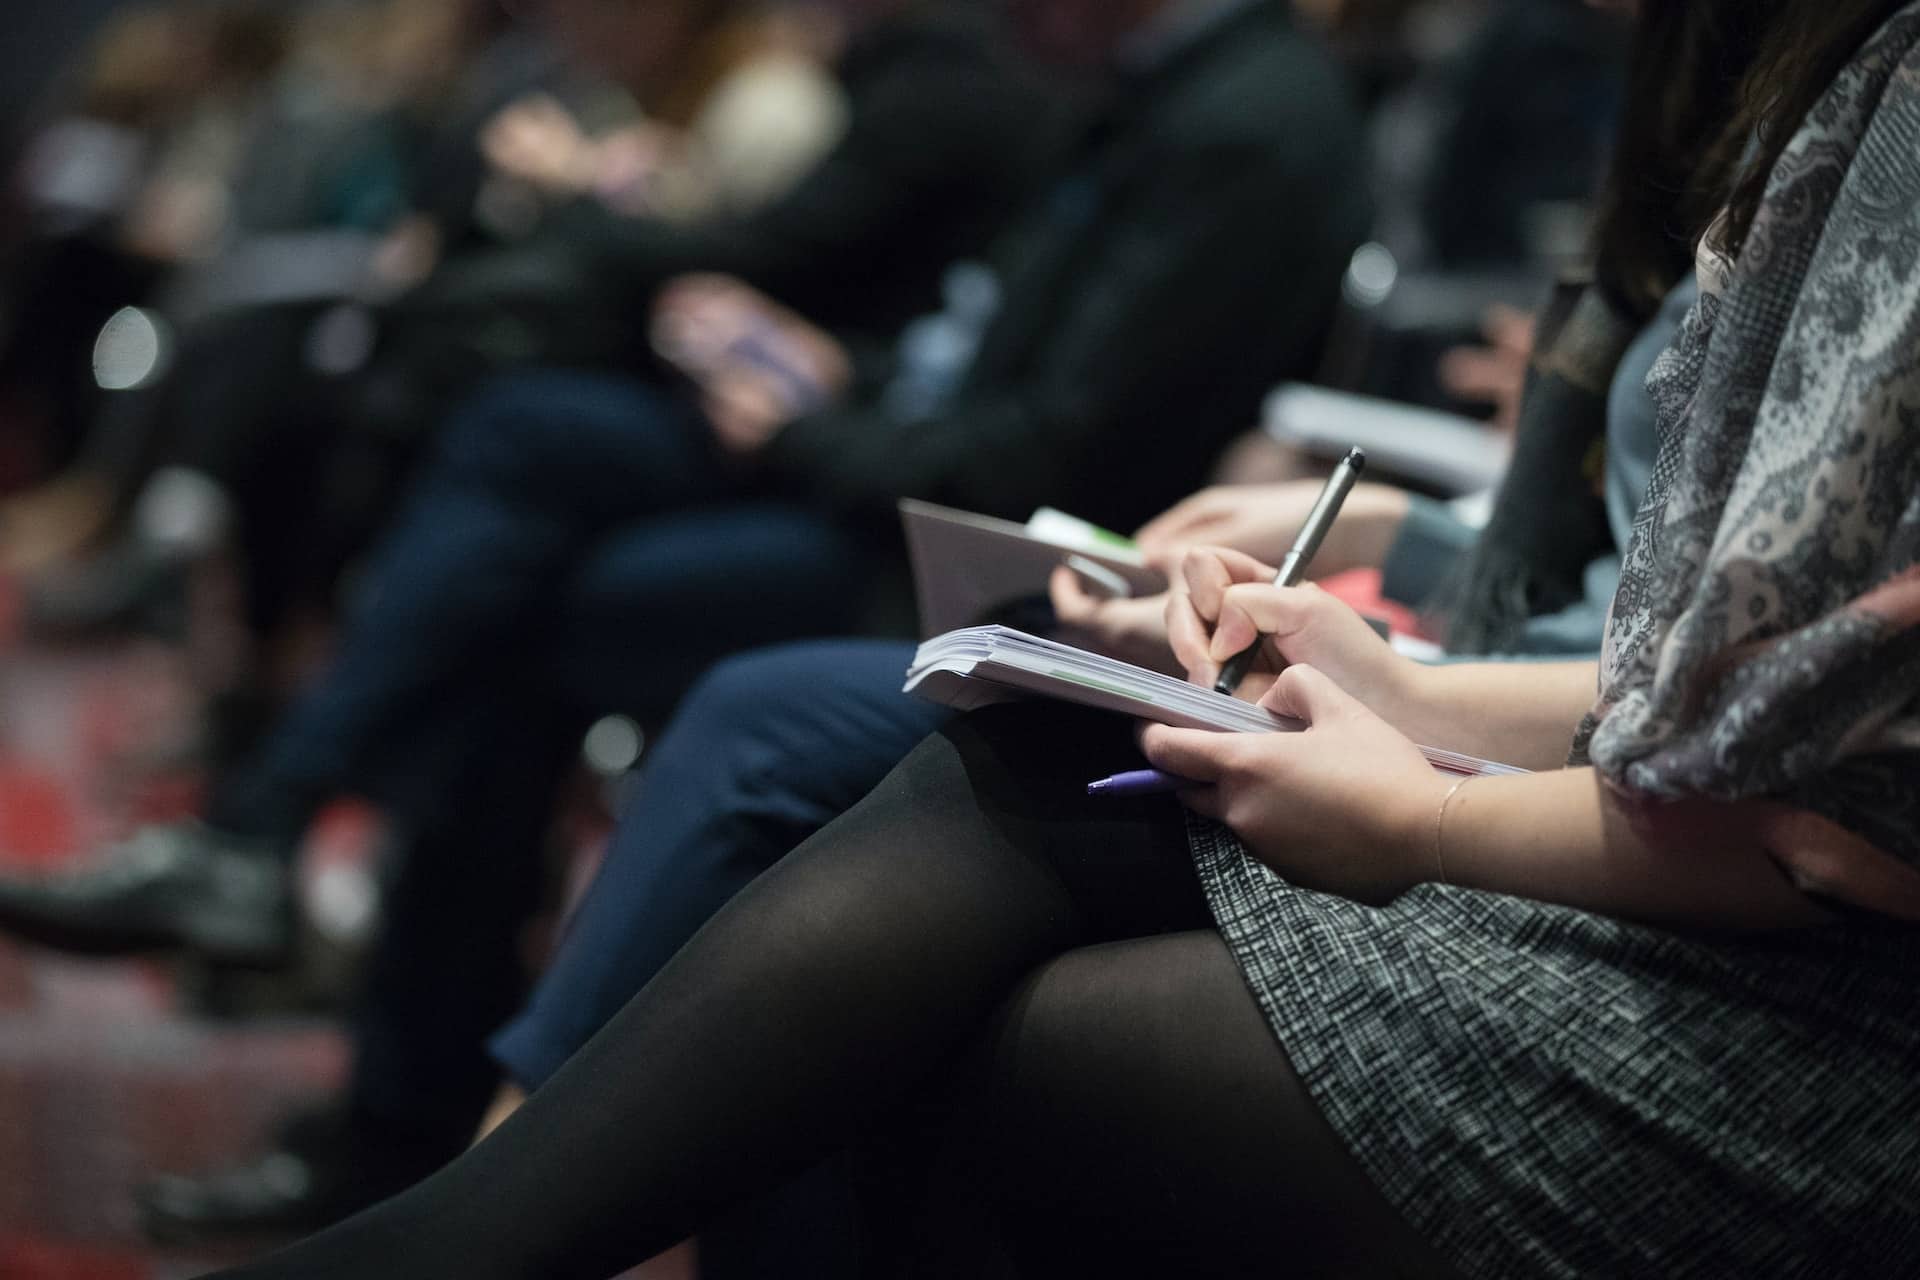 Image Title: NYC Tech Conferences 2024 Image Description: A conference Alt Text: Leadership Conferences New York 2024 Source: https://unsplash.com/photos/selective-focus-photography-of-people-sitting-on-chairs-while-writing-on-notebooks-Hb6uWq0i4MI